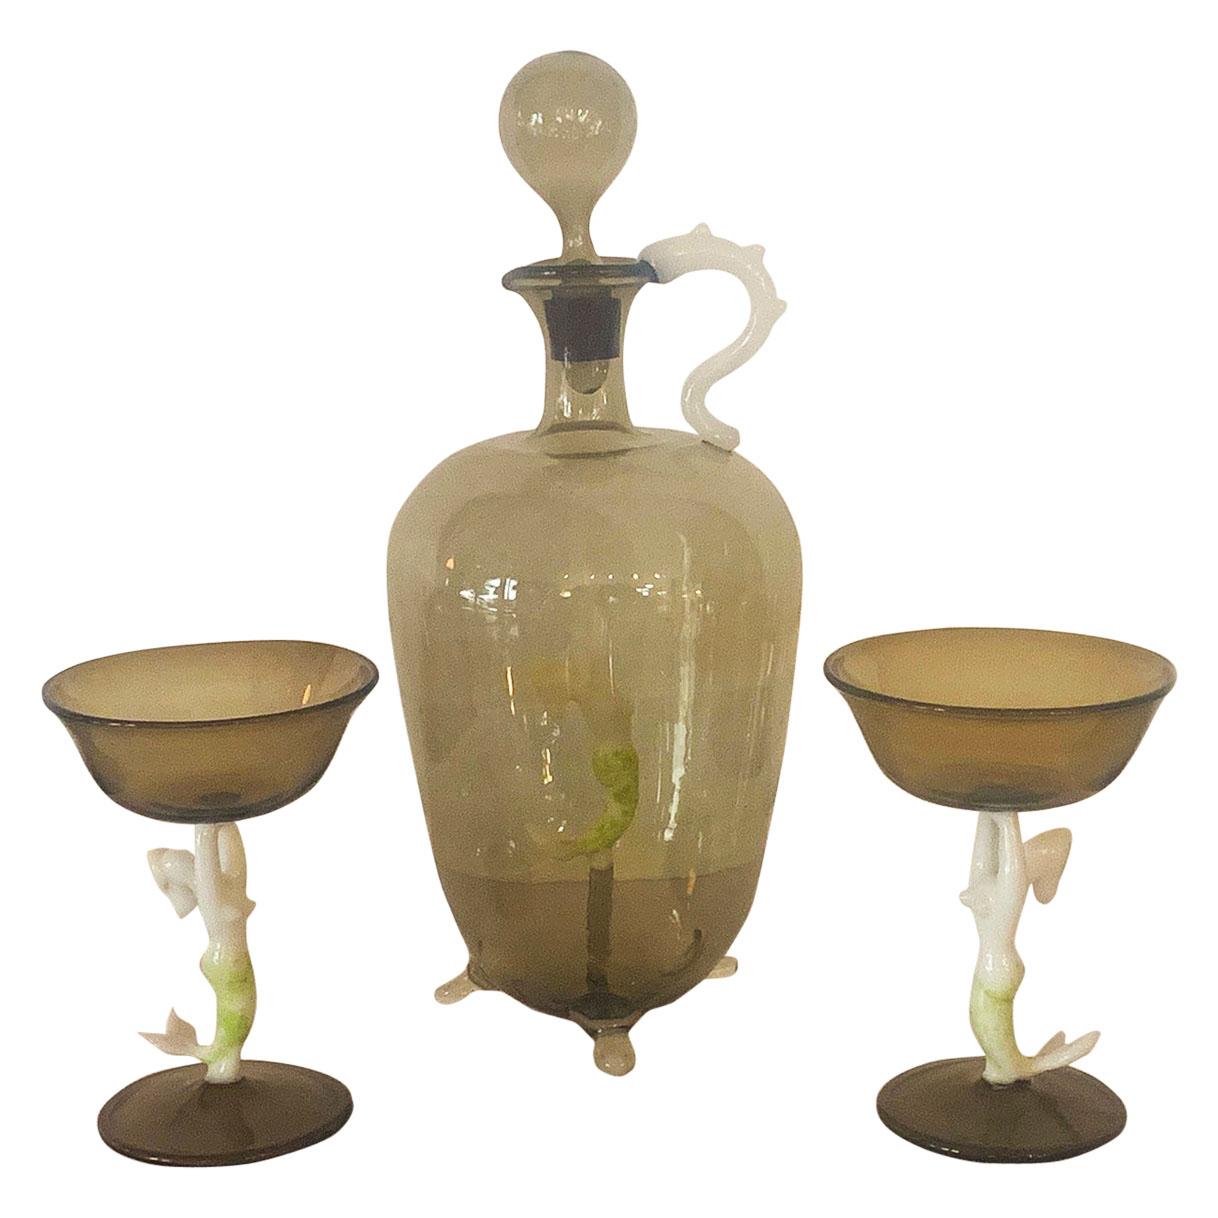 Art Deco Decanter Set by Bimini Werkstate, Stems of the Glasses as Mermaids For Sale